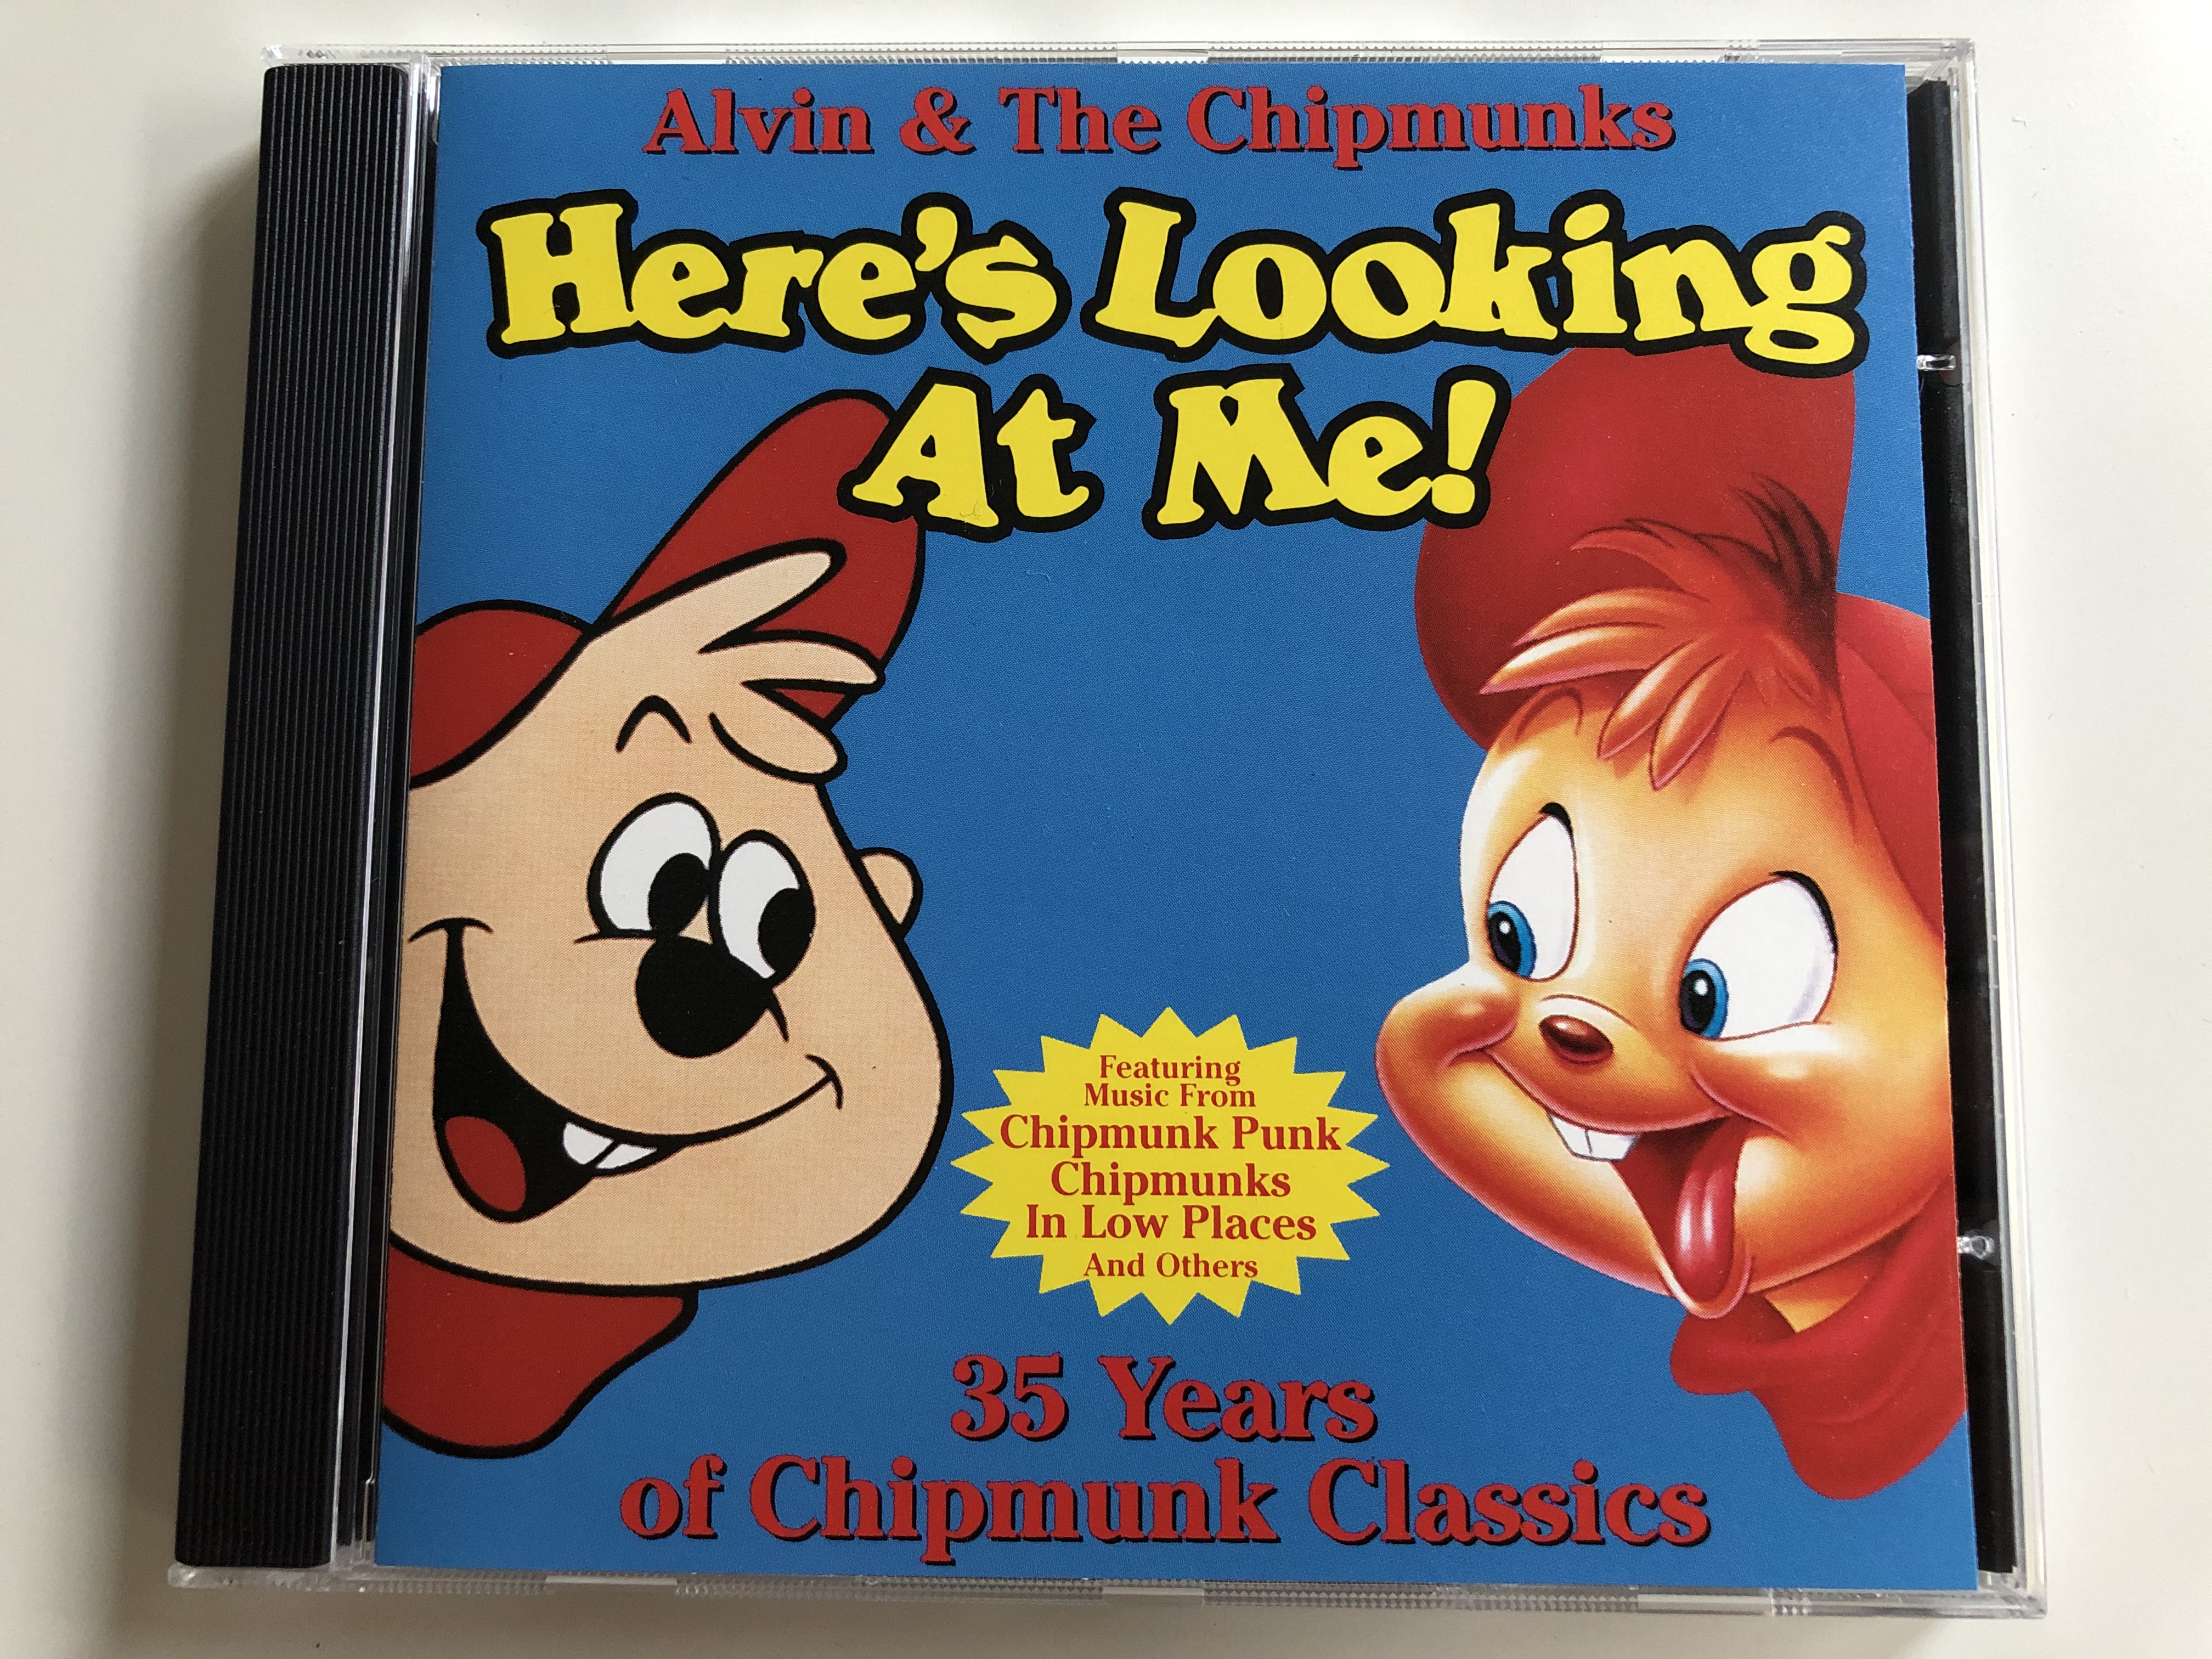 alvin-the-chipmunks-here-s-looking-at-me-featuring-music-from-chipmunk-punk-chipmunks-in-low-places-and-others-35-years-of-chipmunk-classics-chipmunk-records-audio-cd-1993-lk-57821-1-.jpg